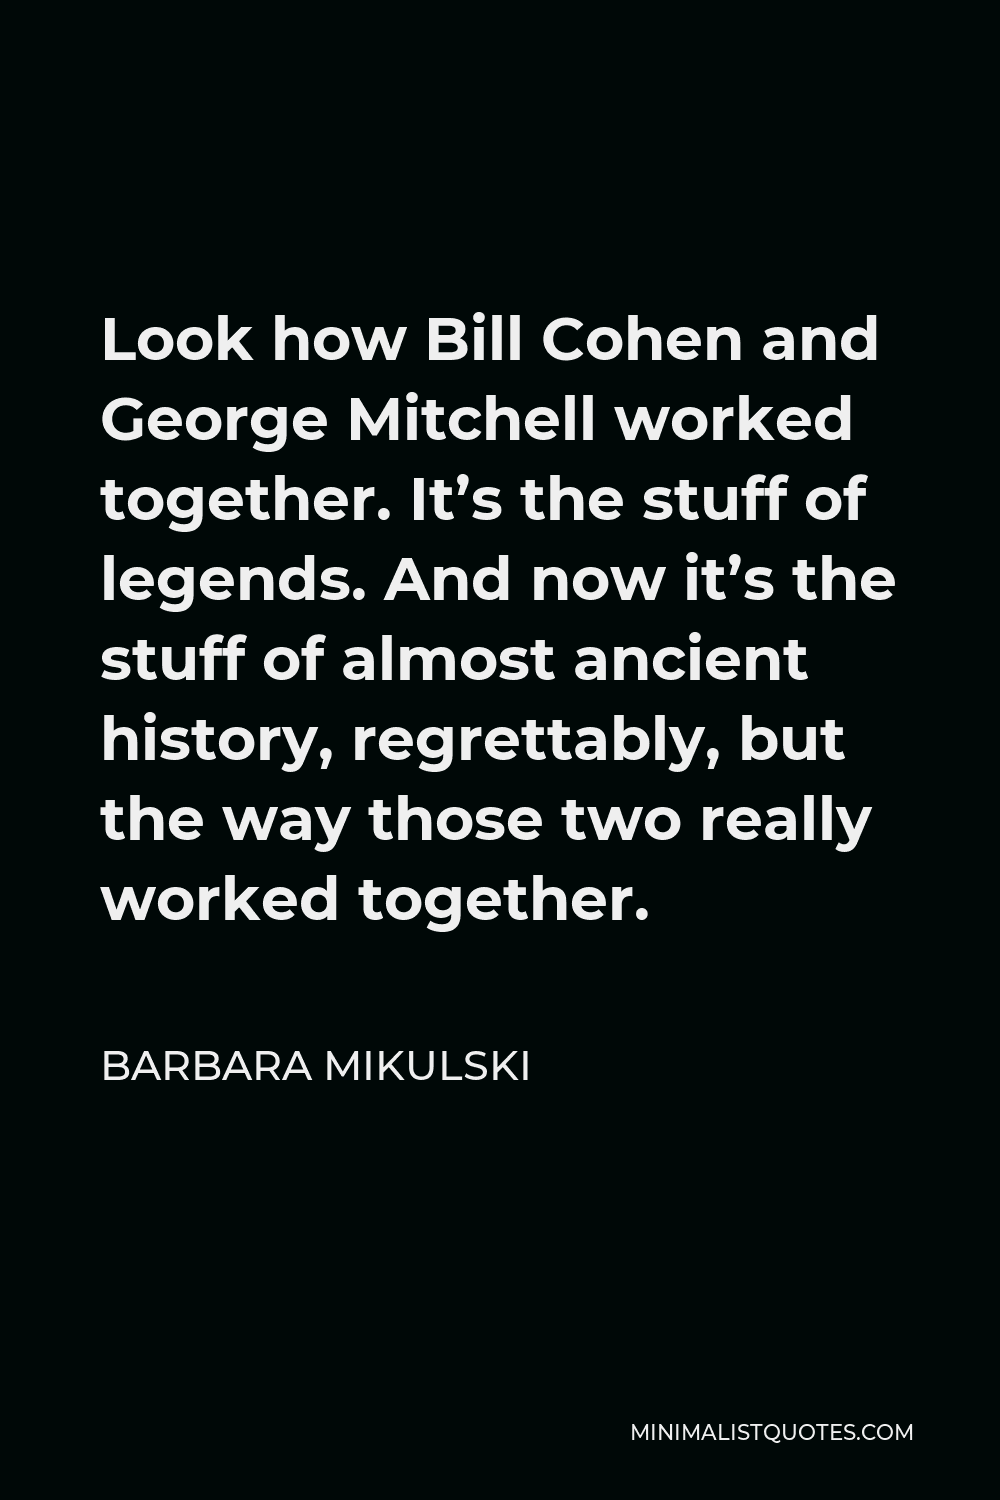 Barbara Mikulski Quote - Look how Bill Cohen and George Mitchell worked together. It’s the stuff of legends. And now it’s the stuff of almost ancient history, regrettably, but the way those two really worked together.